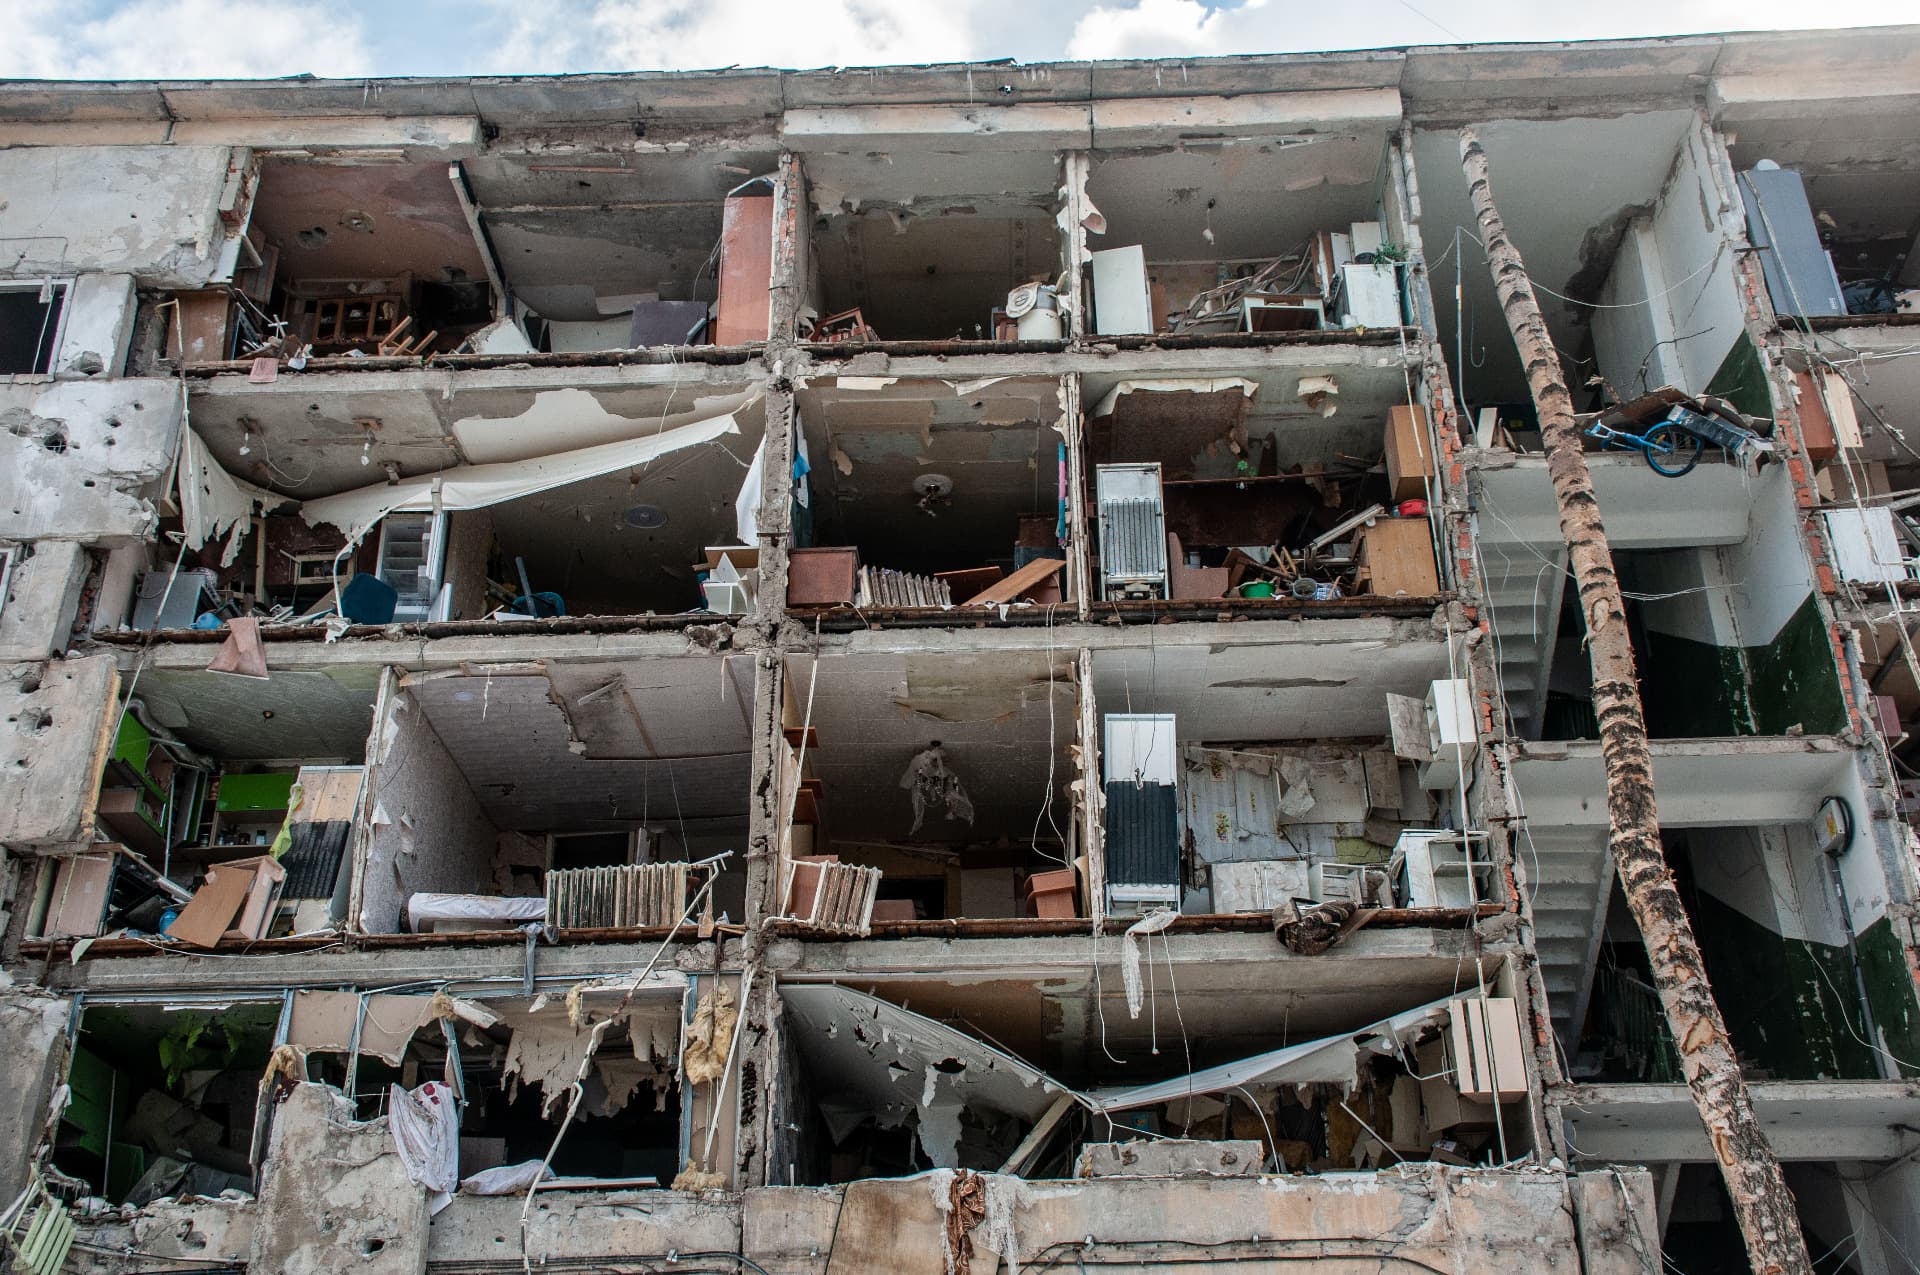 Destroyed residential building, as a result of explosions and shots by the Russian occupying military in Kharkiv